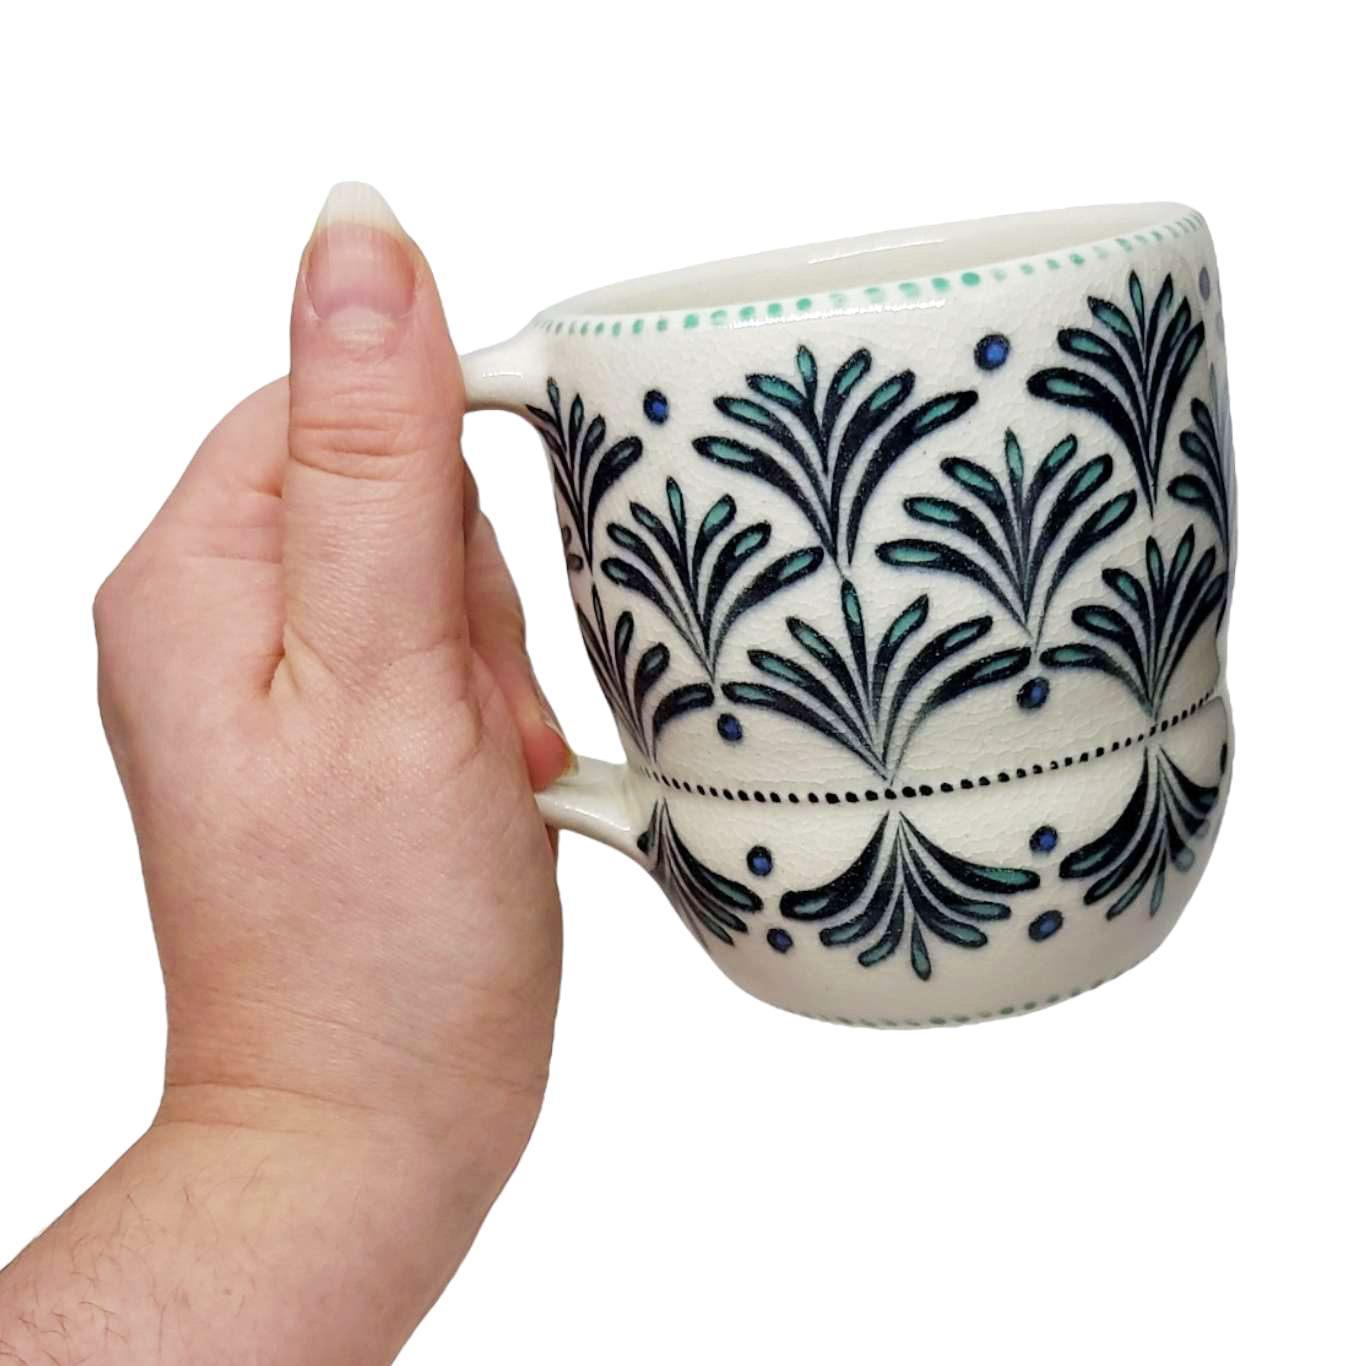 Mug - Small in Tiered Fans with Blue Accents by Britt Dietrich Ceramics